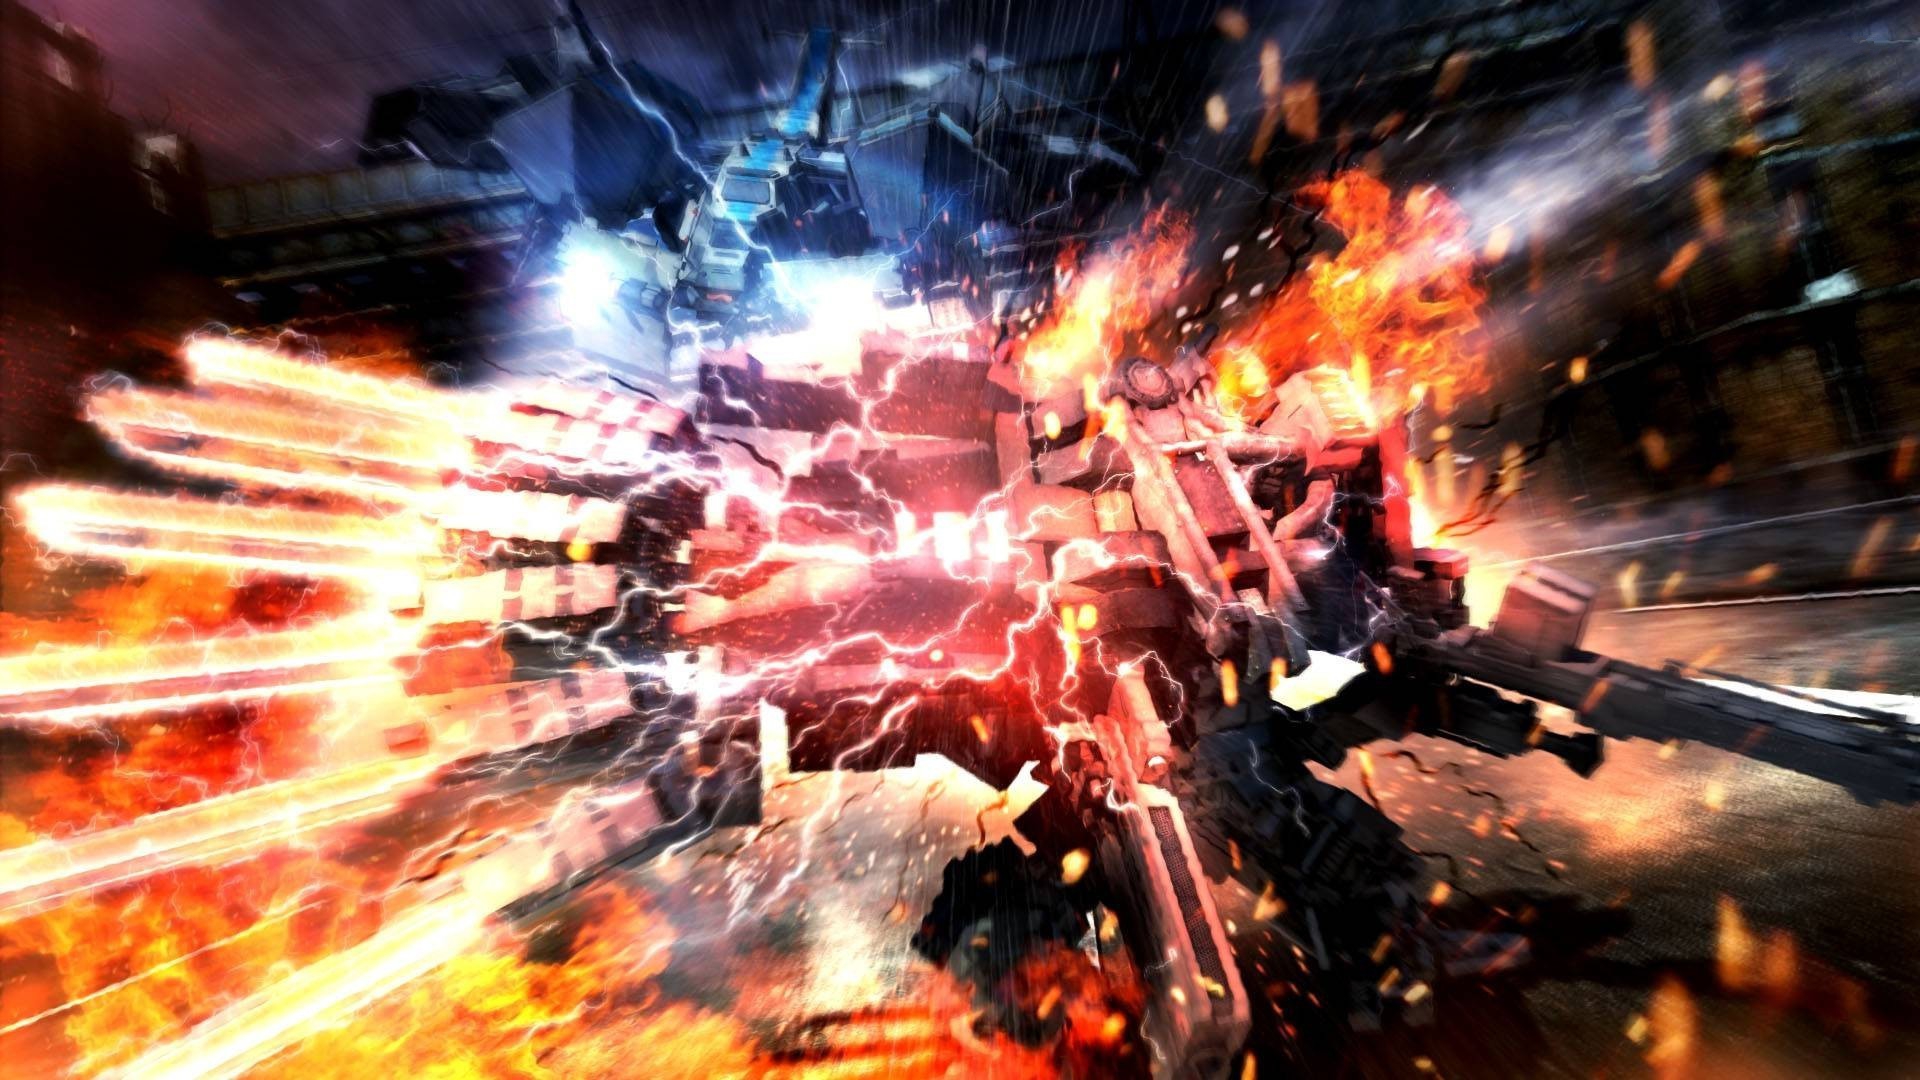 download armored core preorder